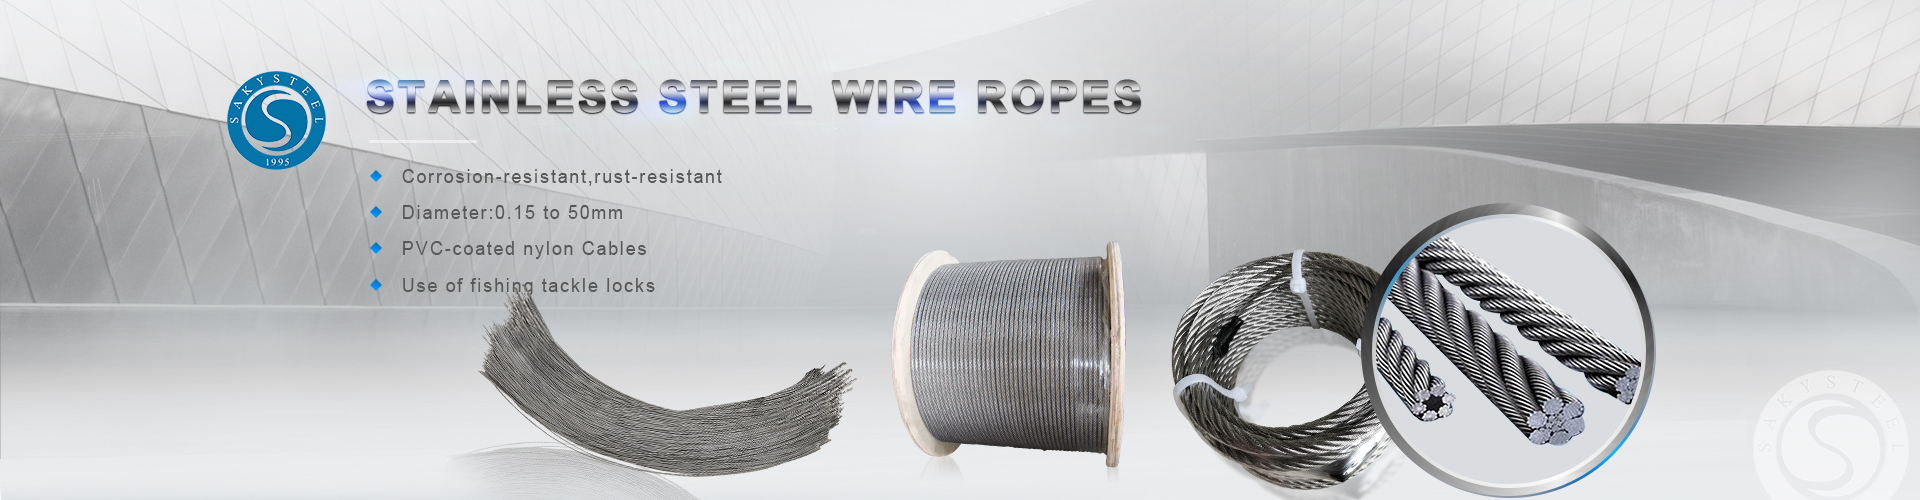 Stainless Steel Wire Ropes From SakySteel